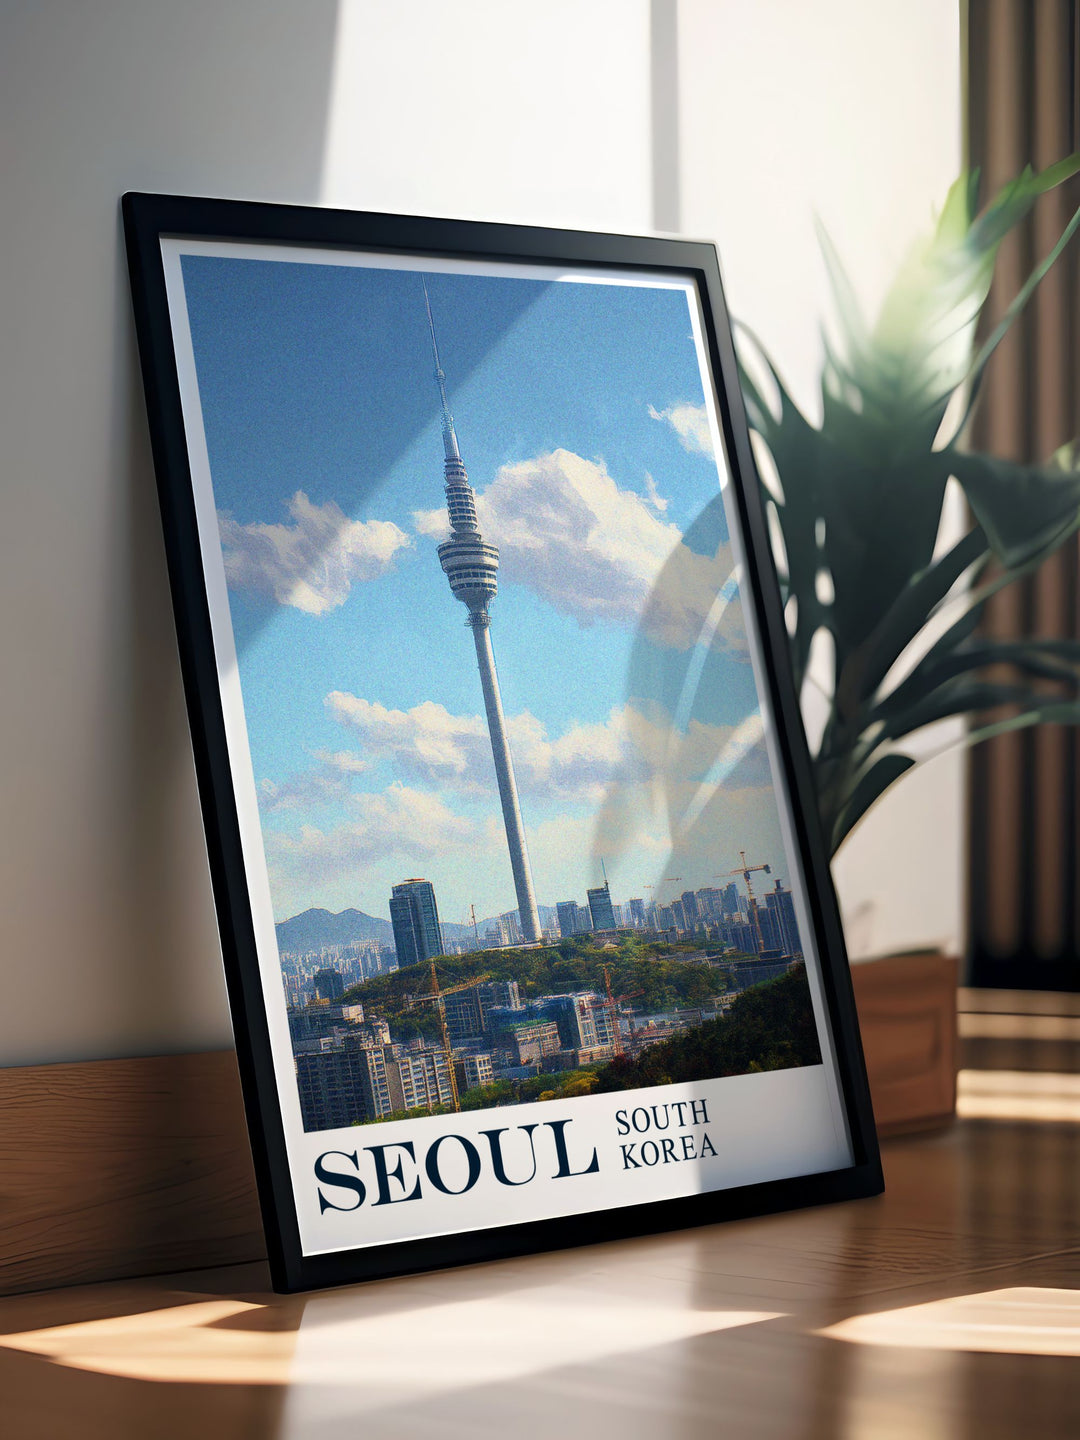 Seoul Tower stands tall in this poster, offering a glimpse into its significance as a beloved city landmark and its breathtaking views, making it an excellent addition to any collection celebrating modern architecture.